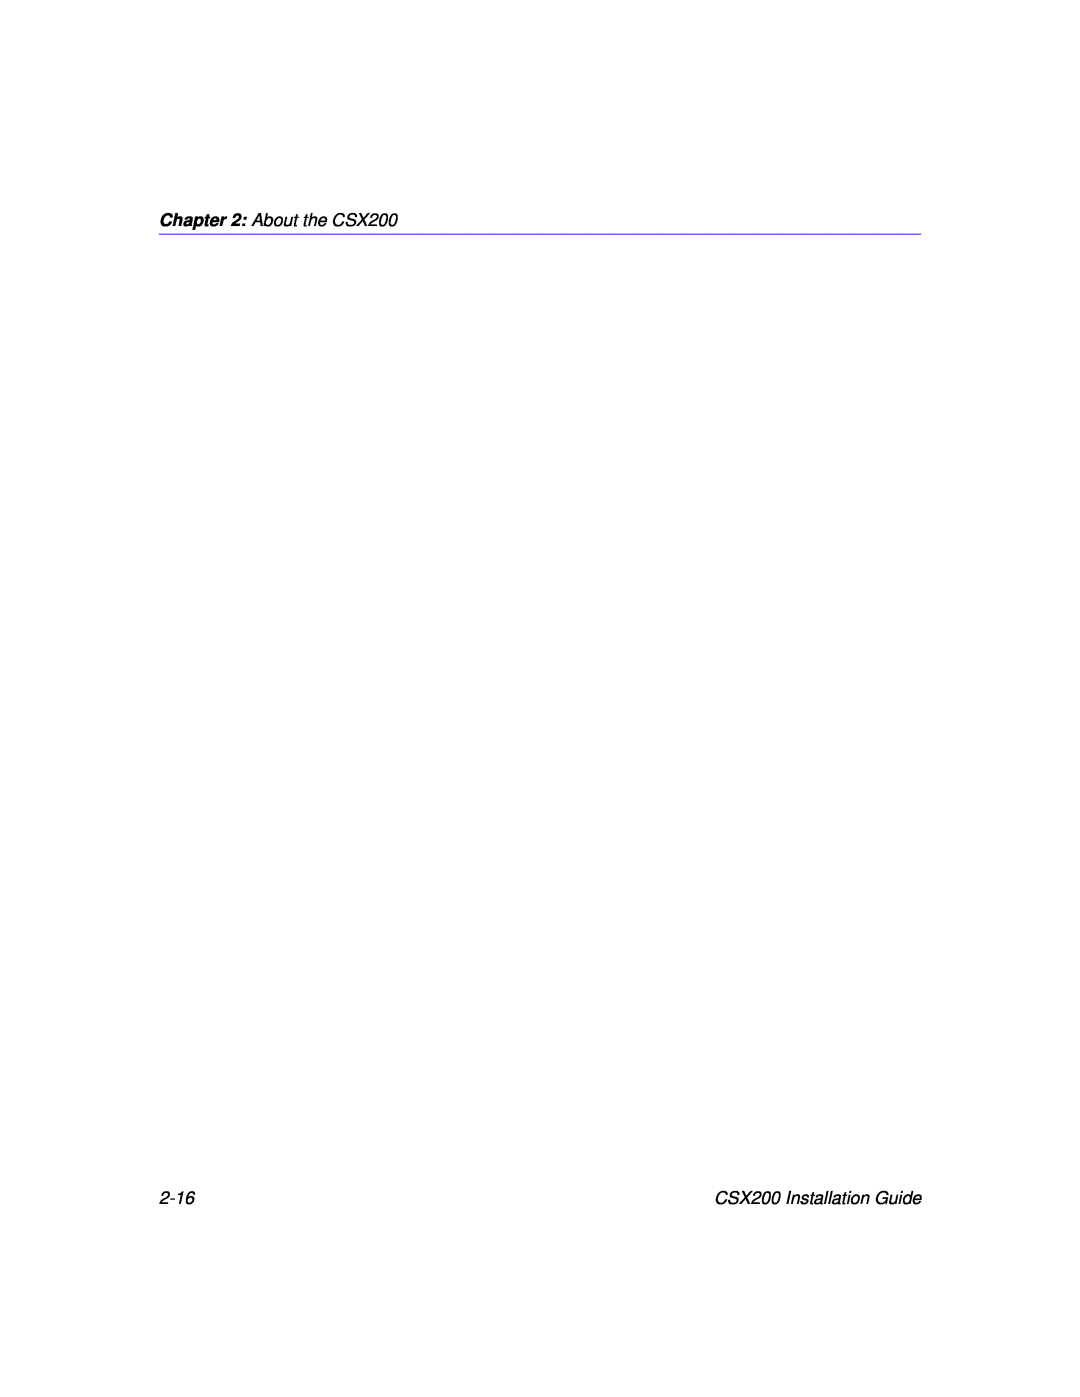 Cabletron Systems manual About the CSX200, 2-16, CSX200 Installation Guide 